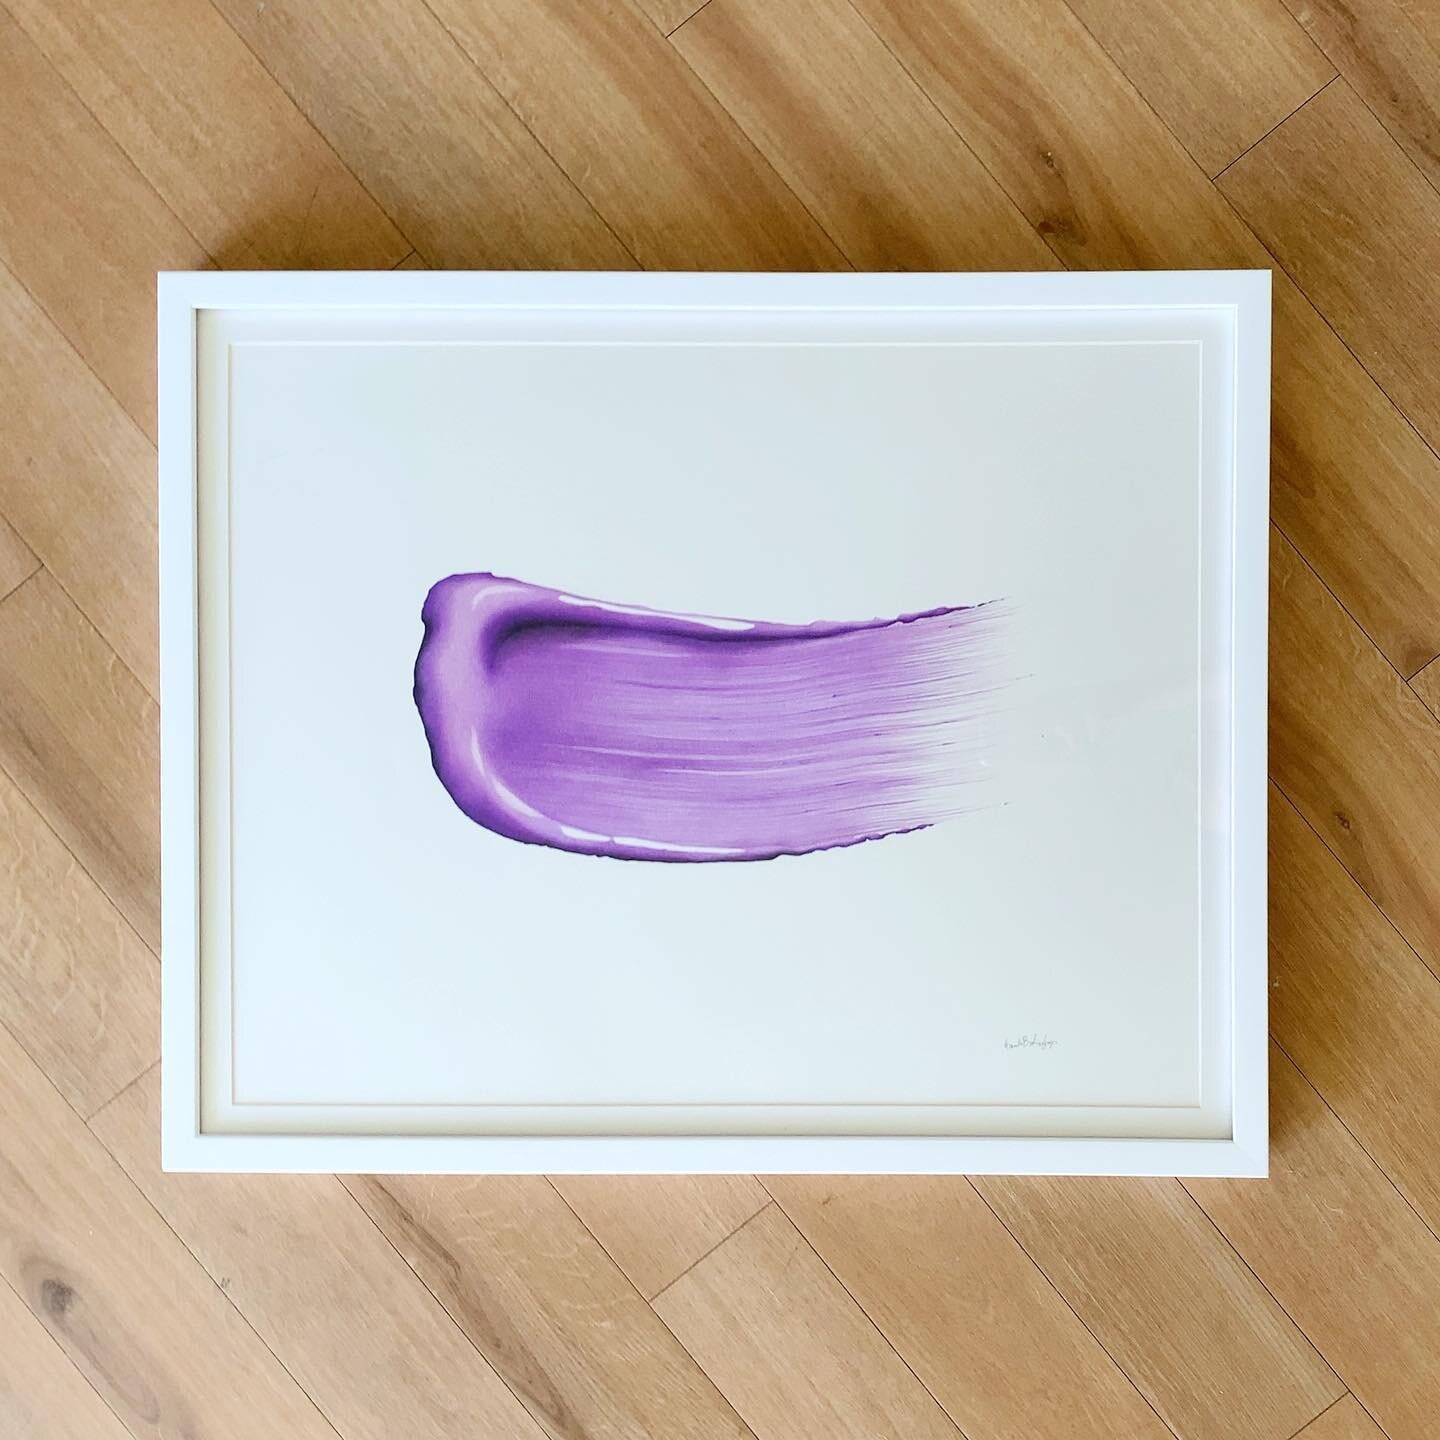 Purple Paint Swipe Drawing 
Colored Pencil on Paper, Framed
Follow the link to my website ⛓
&bull;
This piece has moved around with me a lot these past two years- it was made in our apartment in Seattle, then brought to NY for @affordableartfairnyc a